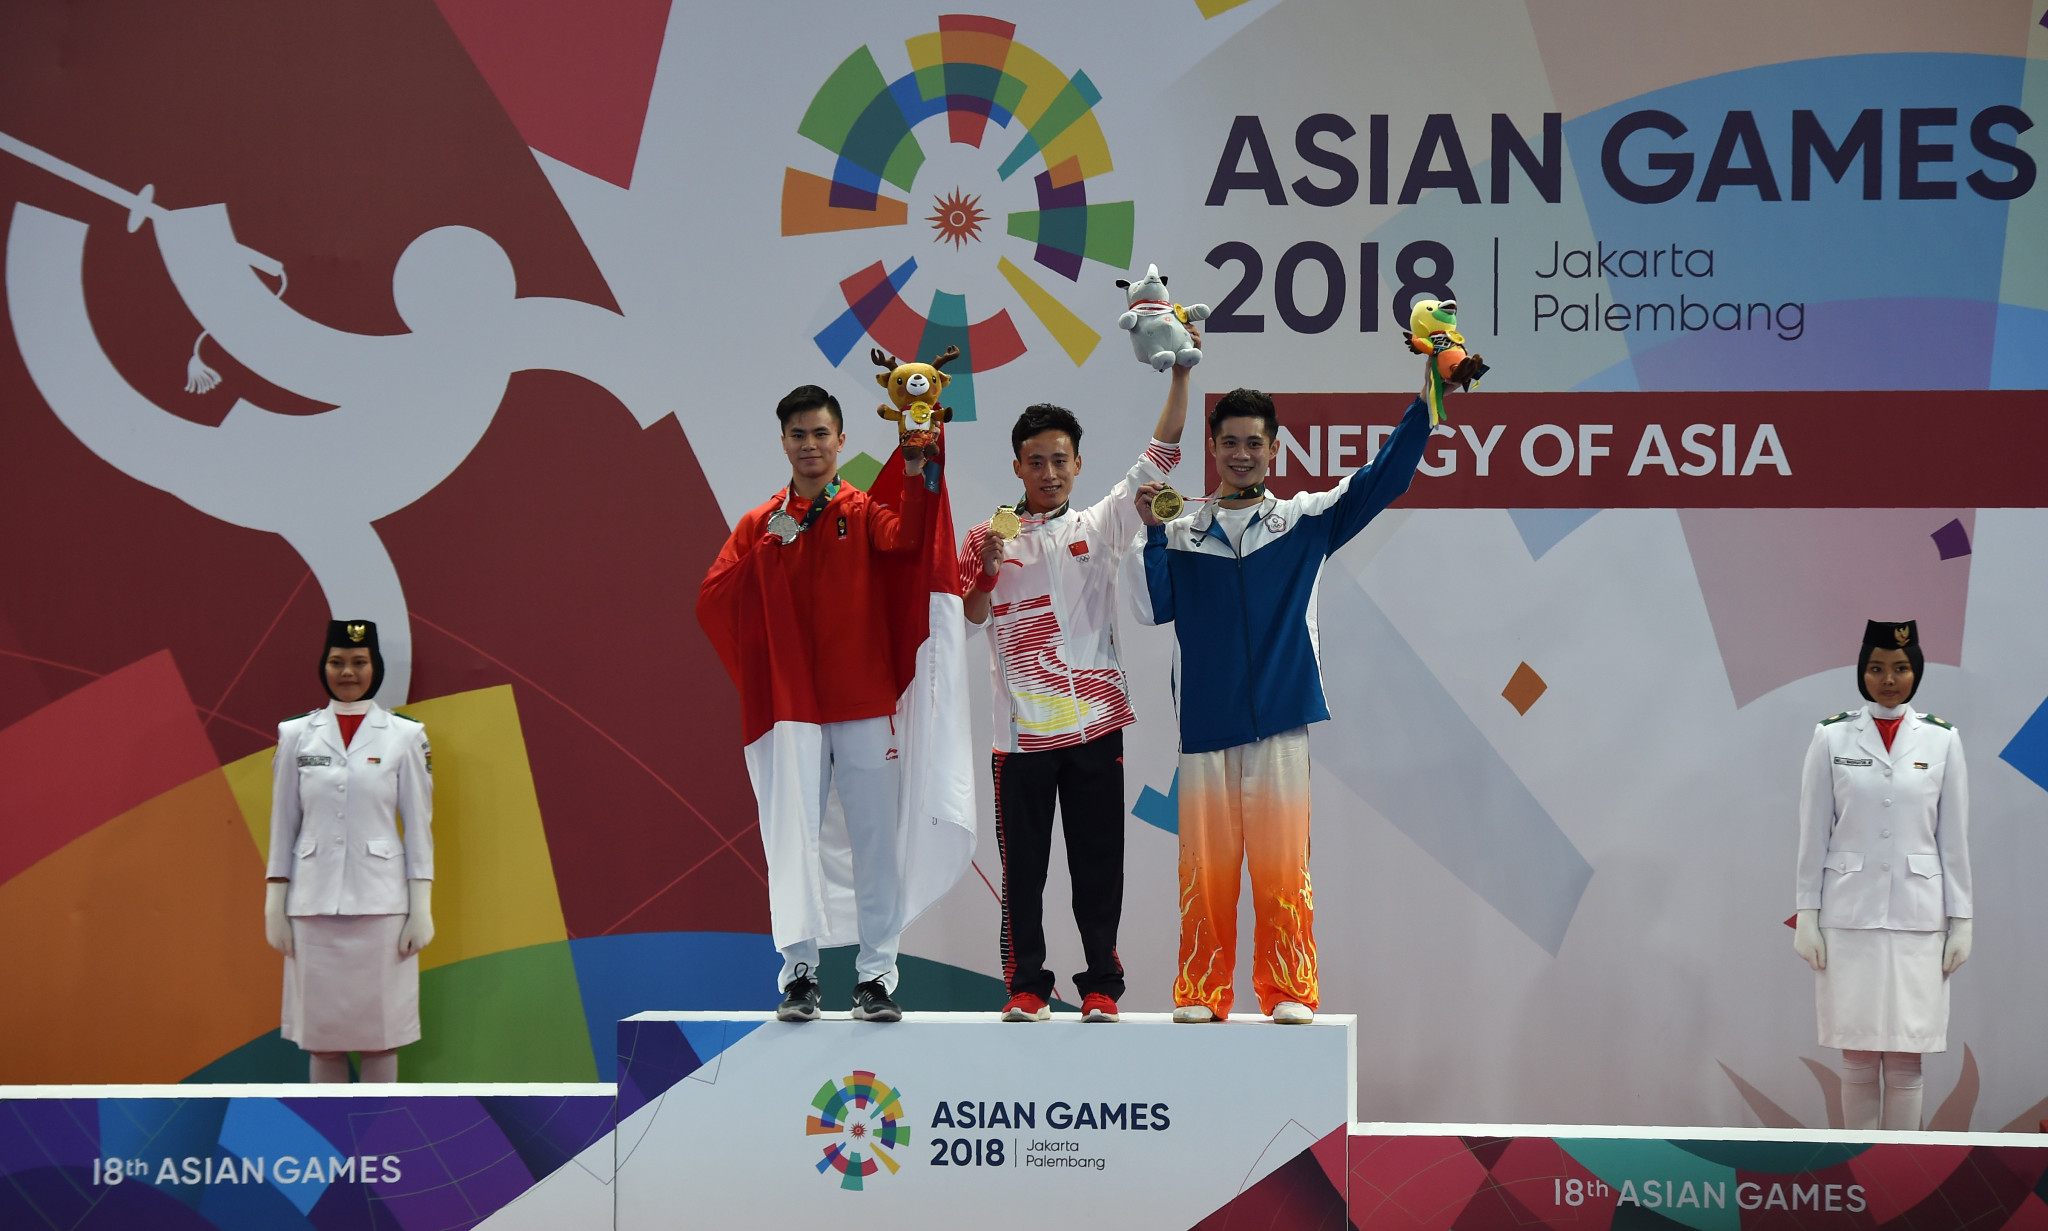 China took the very first gold medal of the Games in the men's changquan wushu shortly after 9am local time, while Edgar Xavier Marvelo won Indonesia's first medal with silver ©Getty Images